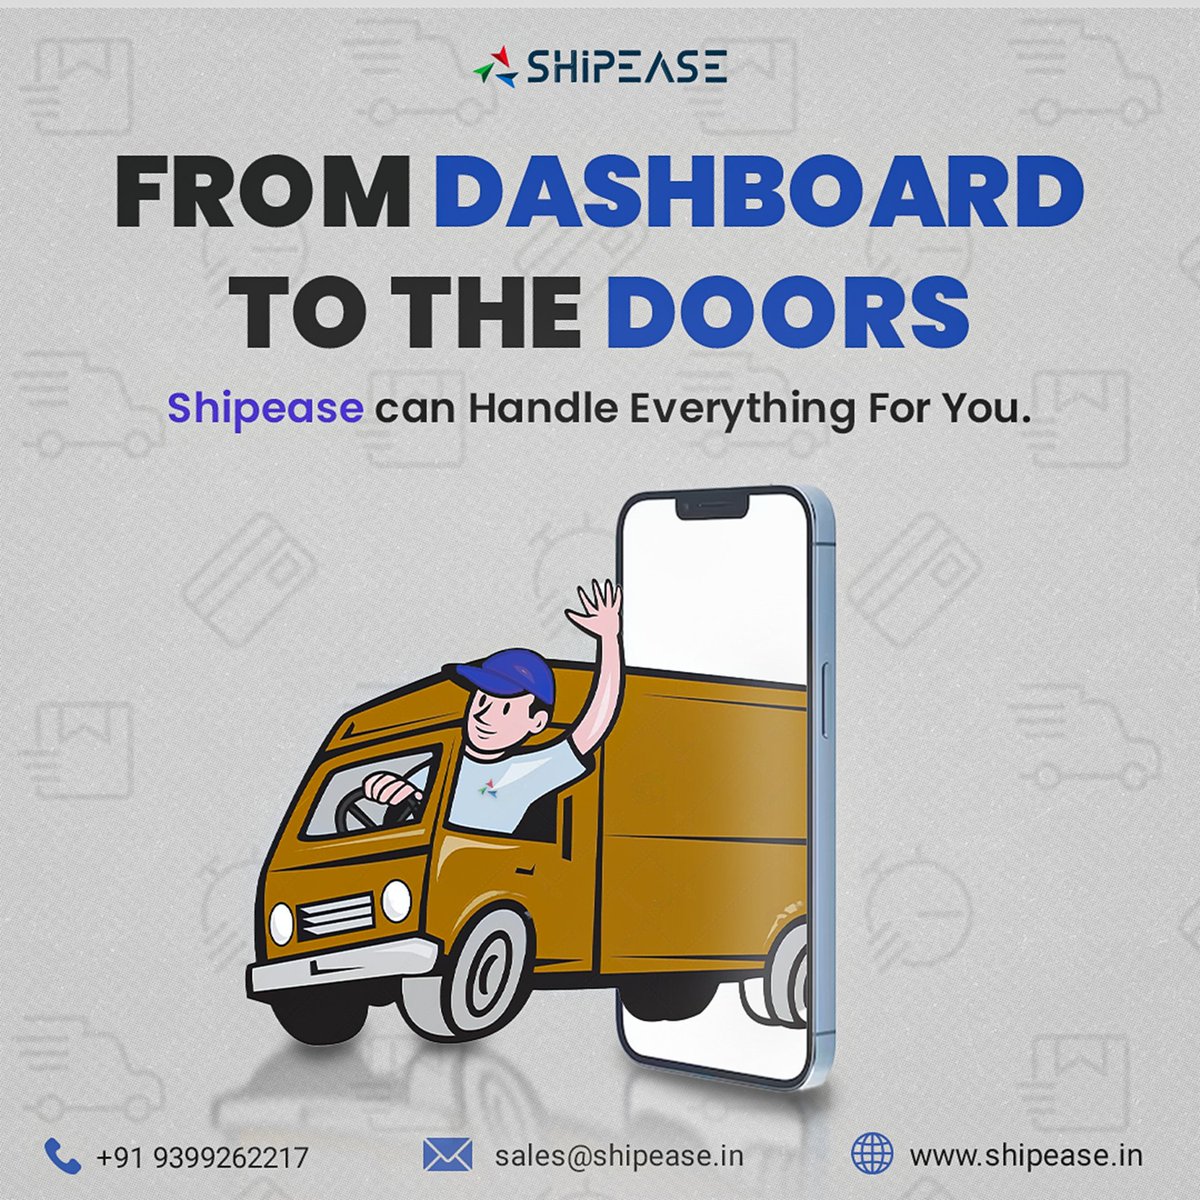 We have got you! You work on the product, ShipEase will work on the delivery.

#shipease #deliverypartner #efficiencyatitsbest #reliabledelivery #productfocus #deliverysimplified #entrepreneurlife